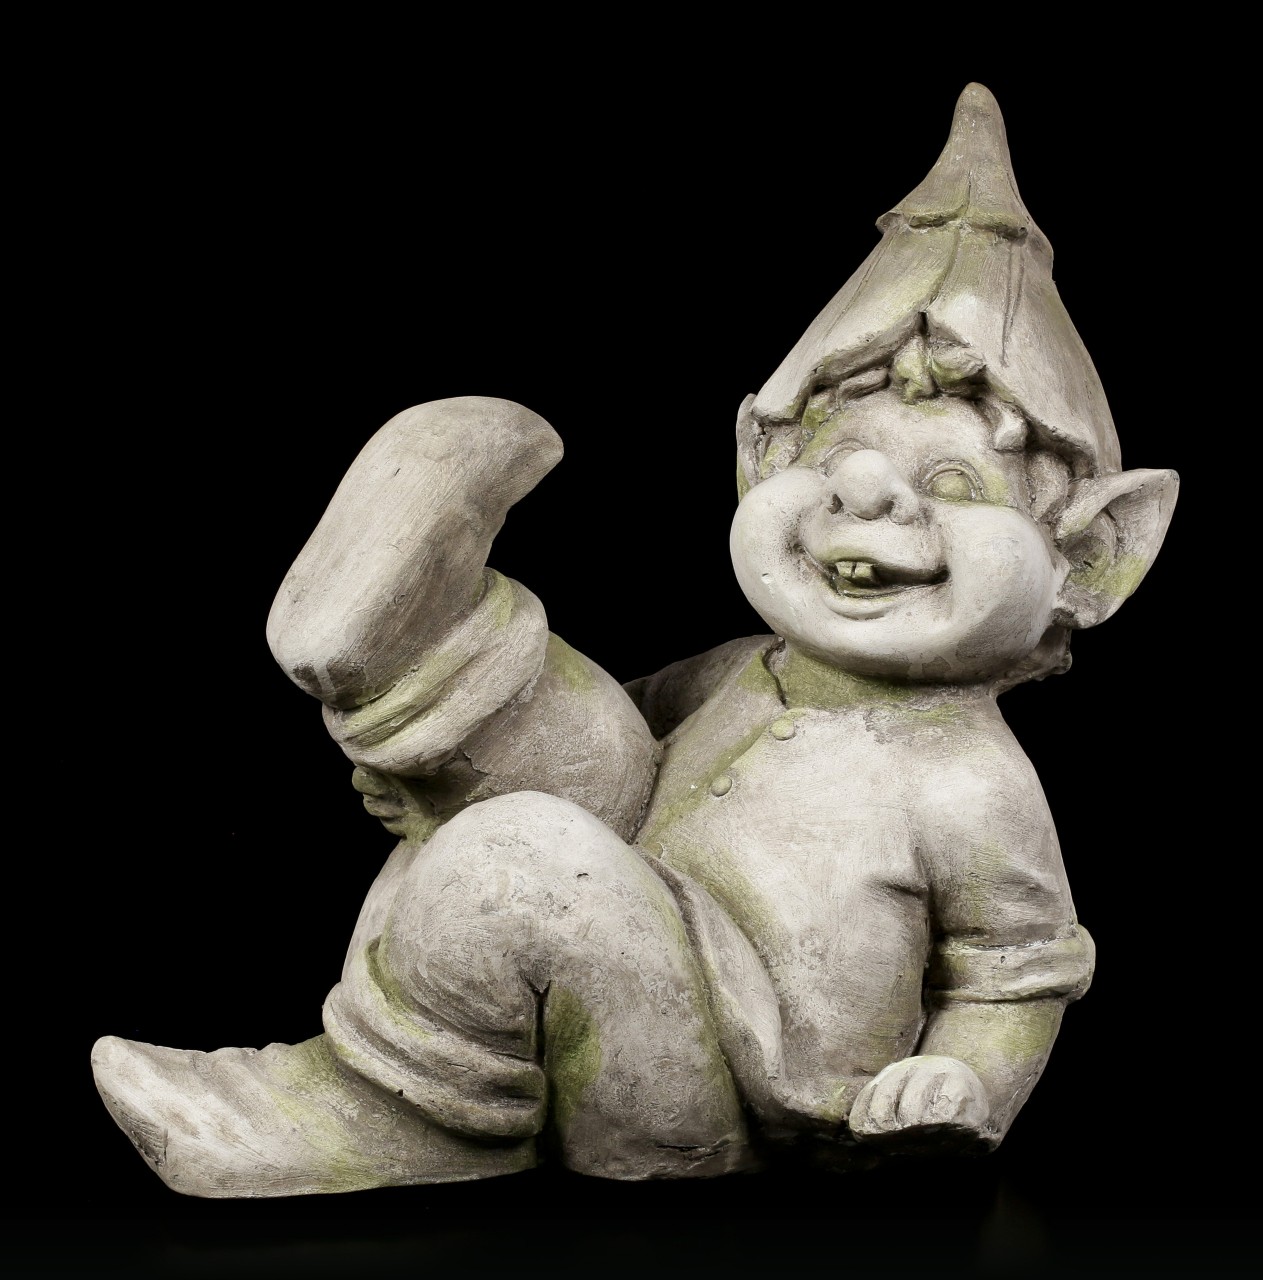 Troll Garden Figurine - Laughing on the Ground